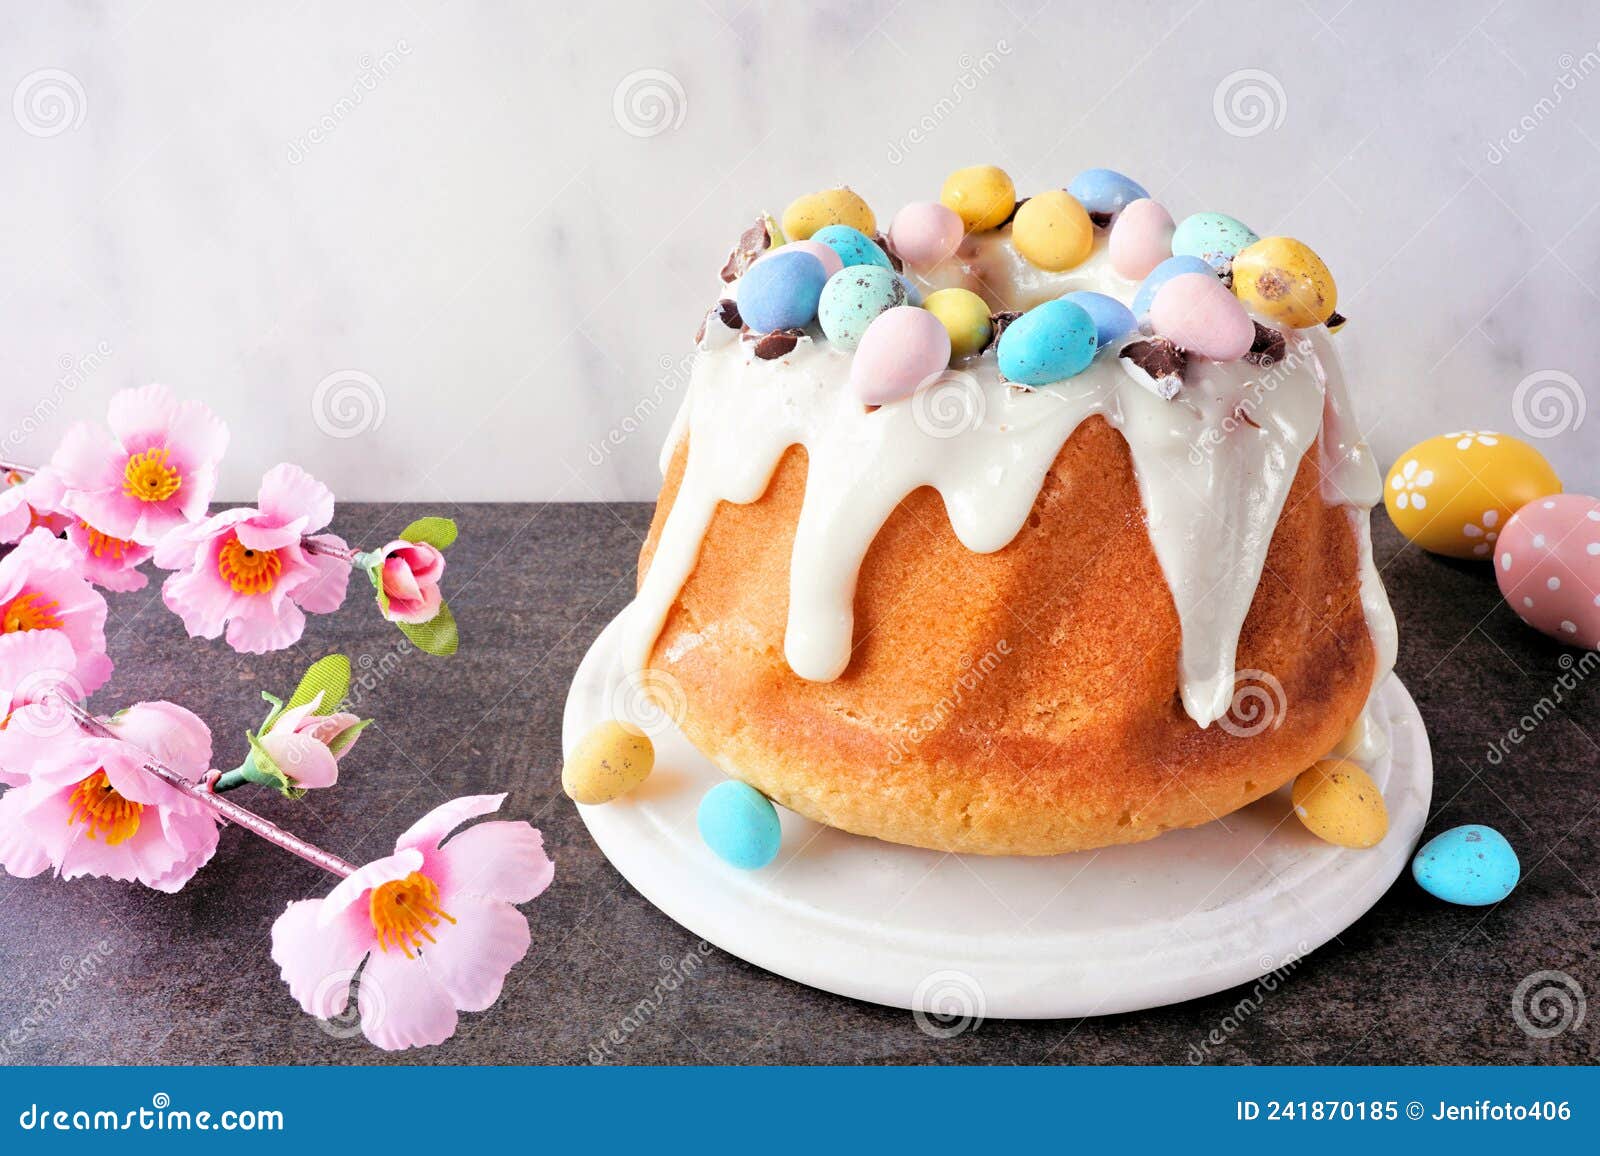 Easter Bundt Cake Decorated Colorful Chocolate Candy Eggs. Stock Image ...